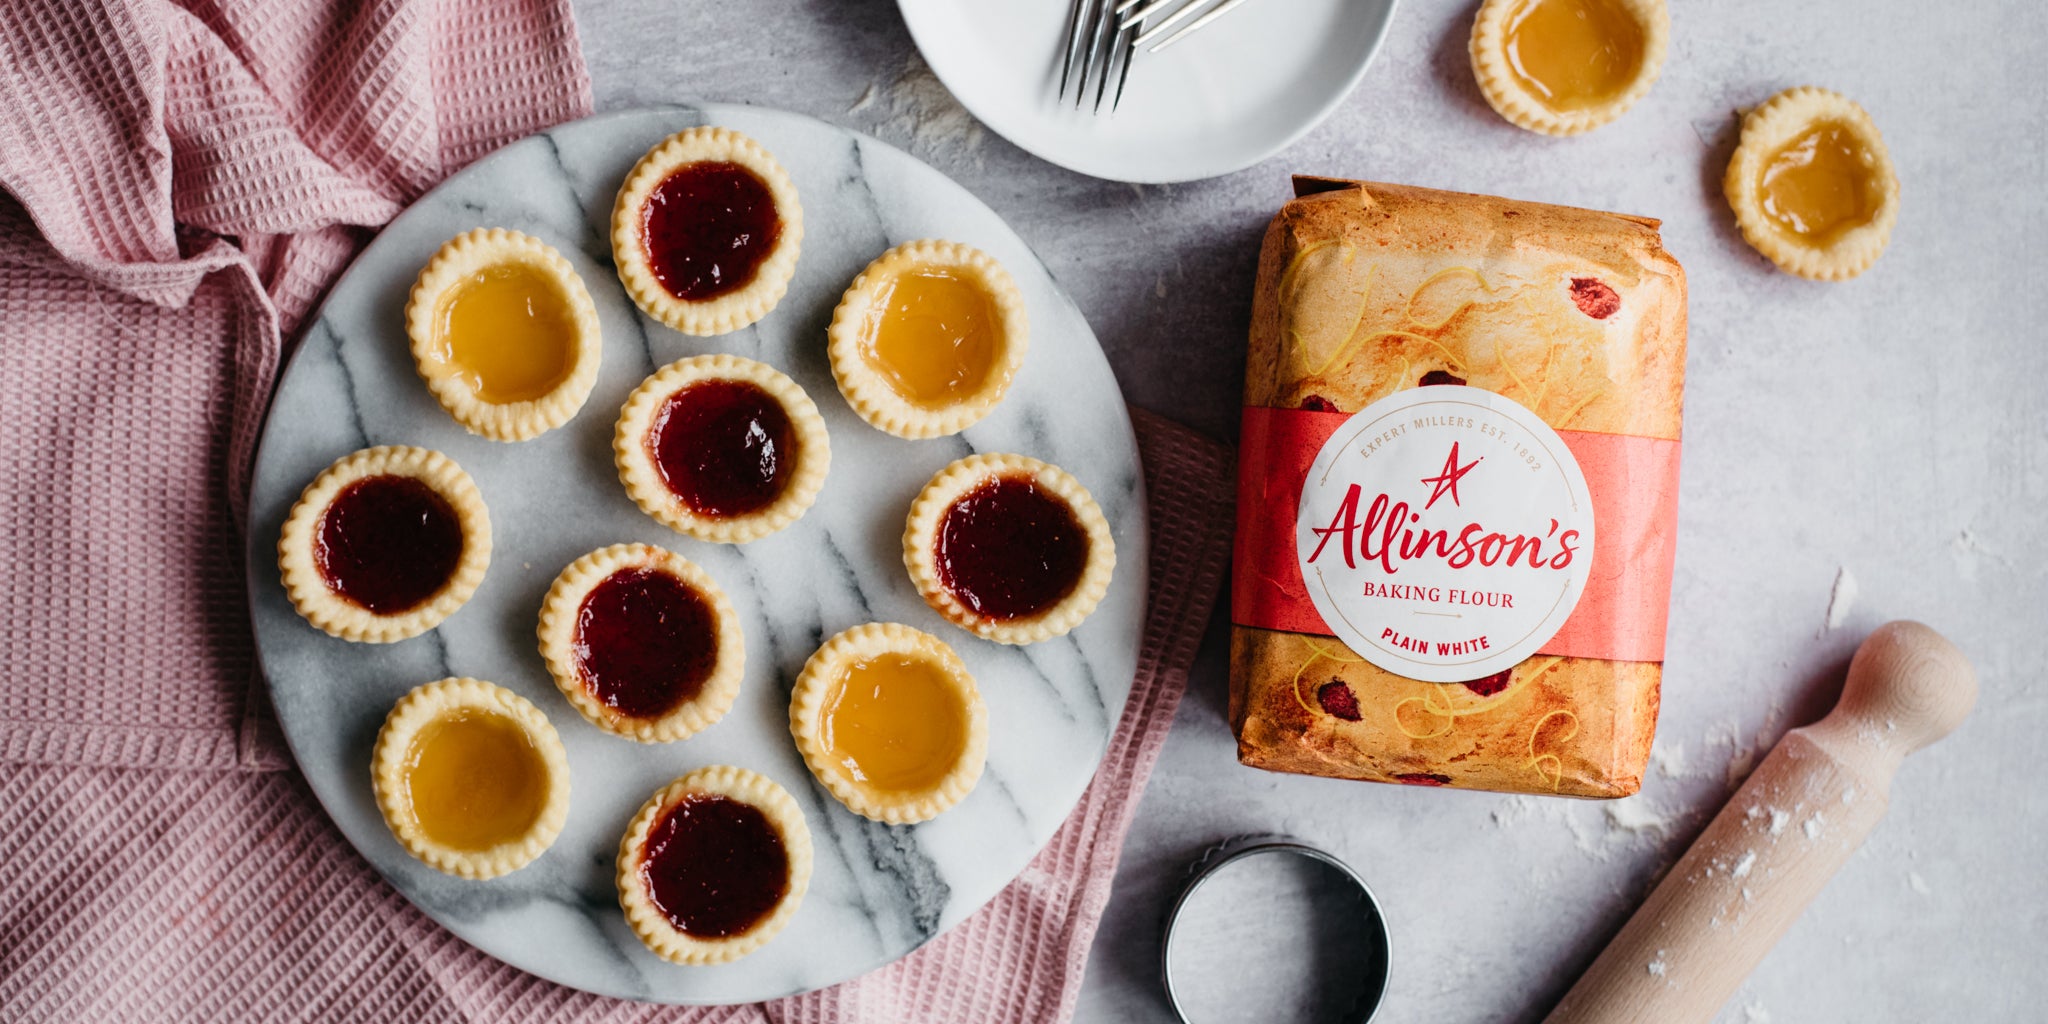 Top view of Strawberry & Apricot Jam Tarts next to a flat lay bag of Allinson's Plain Flour